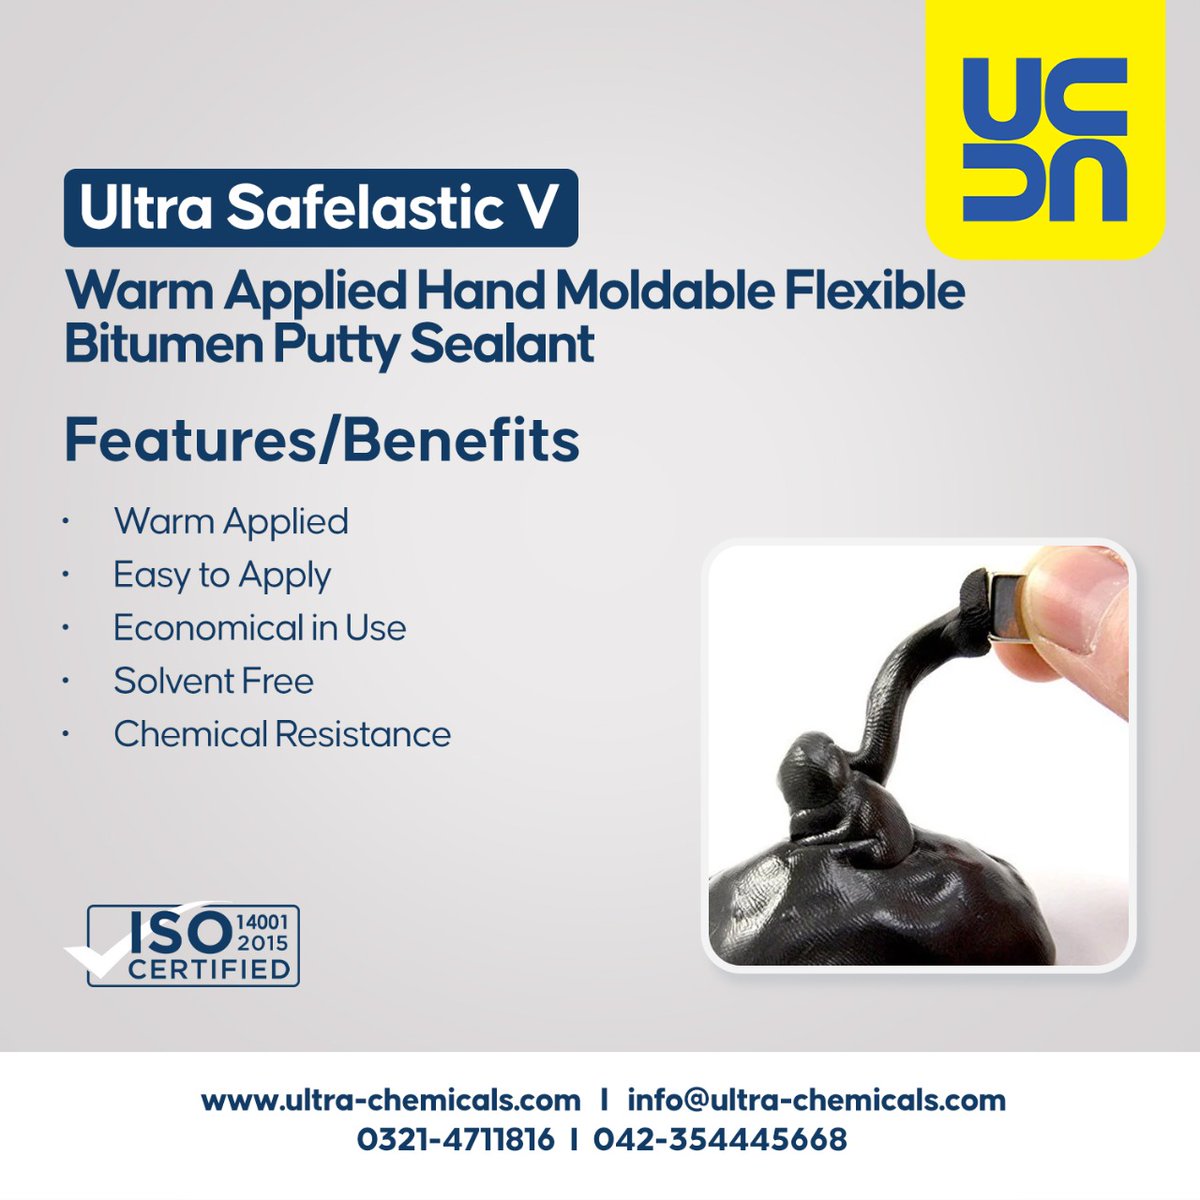 ULTRA SAFELASTIC V is a polymerized bitumen-based flexible sealant with outstanding adhesion.
☎️ : 04235445668
📱 : 03214711816
#constructionchemicals #safelasticv #pusealants #power2000 #concreteadmixture #concrete #waterproofing #weatherguard #epoxygrout #wallputty #wallprimer